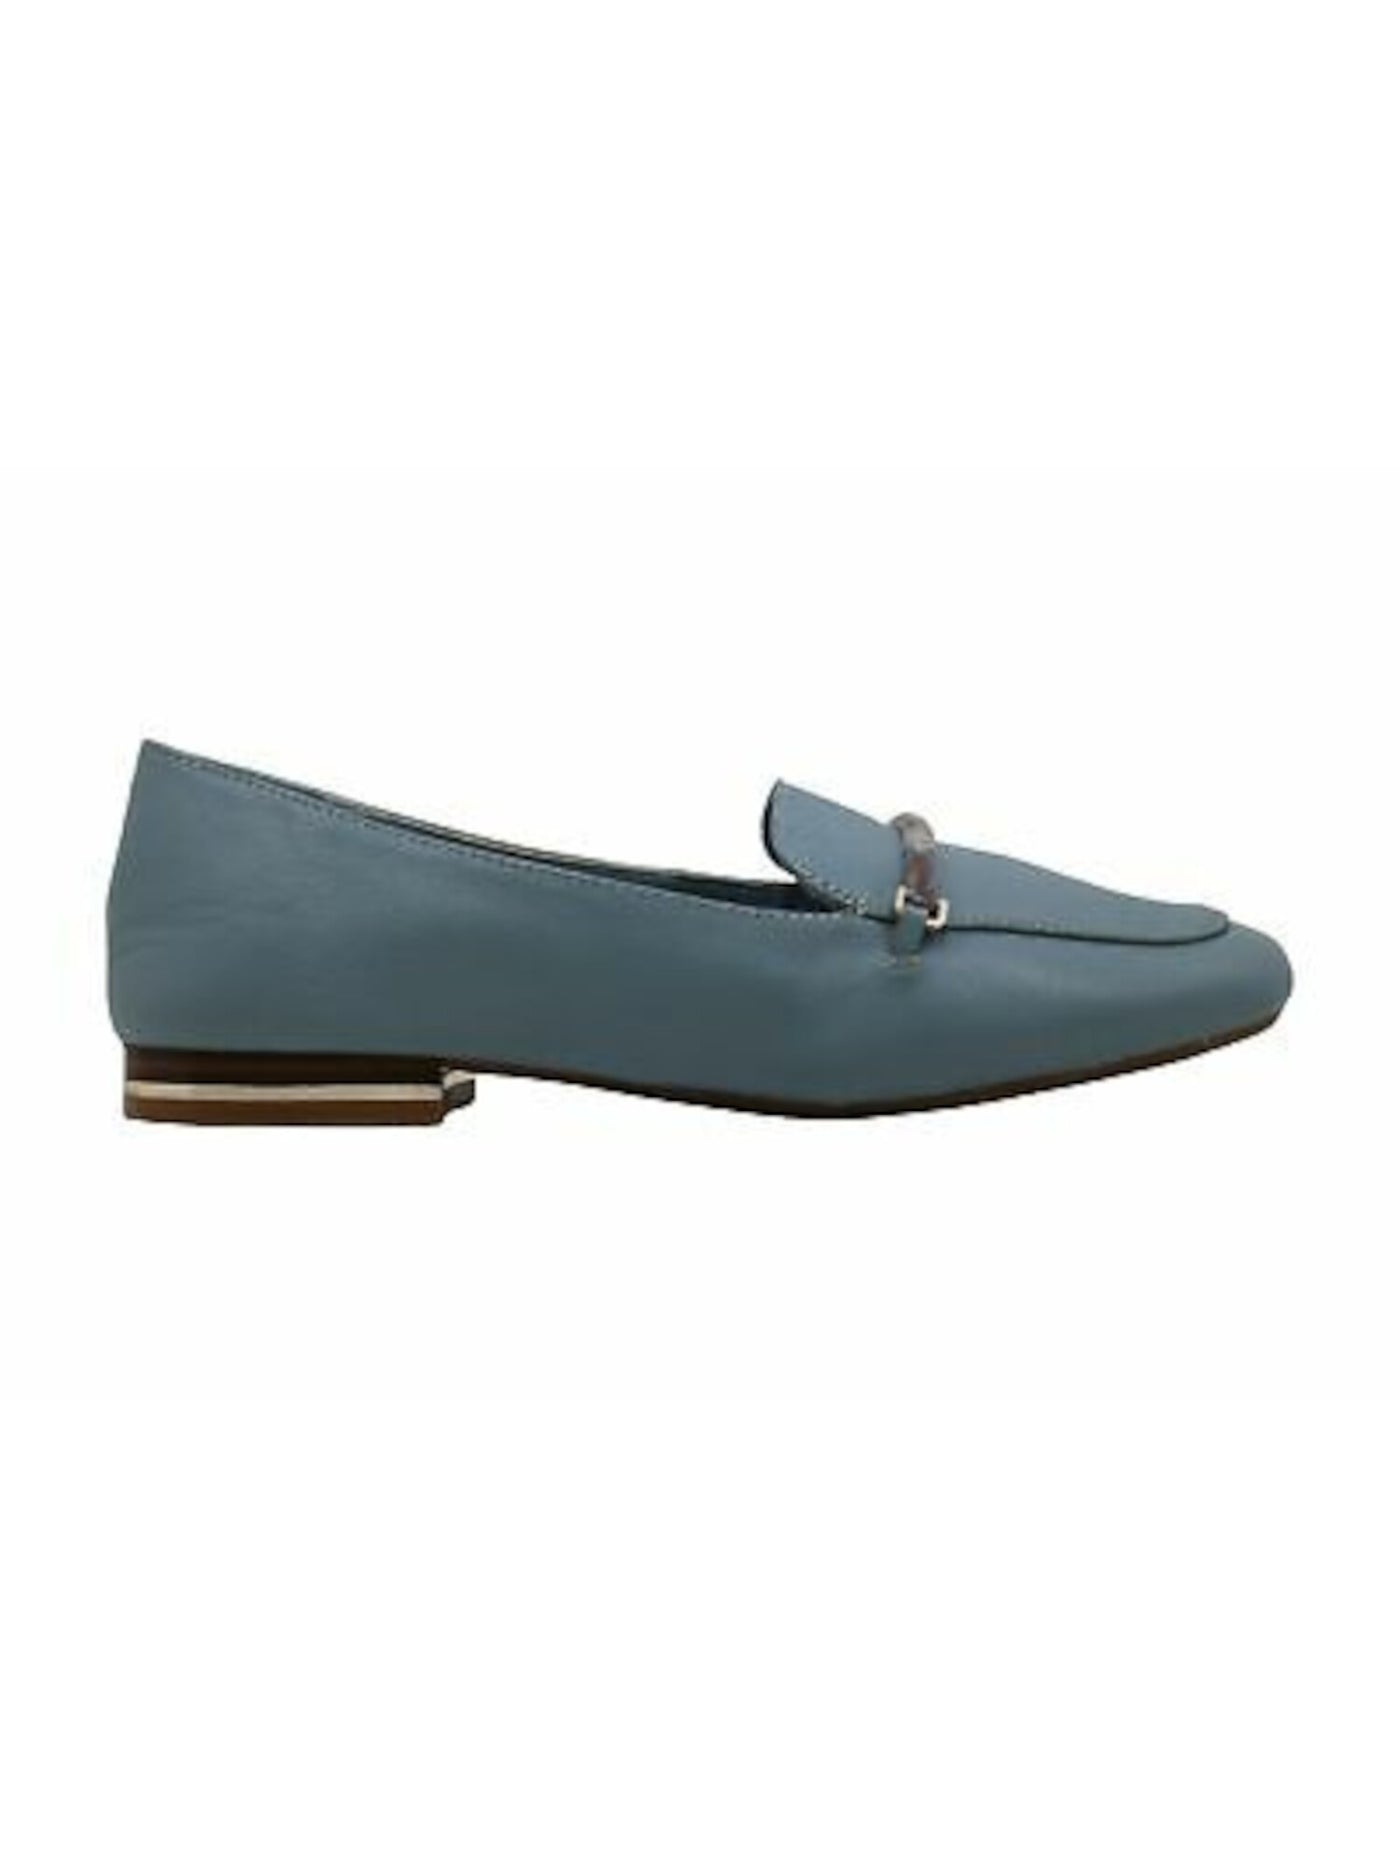 KENNETH COLE NEW YORK Womens Light Blue Hardware Detail At Toe Cap Comfort Balance Round Toe Block Heel Slip On Leather Loafers Shoes M